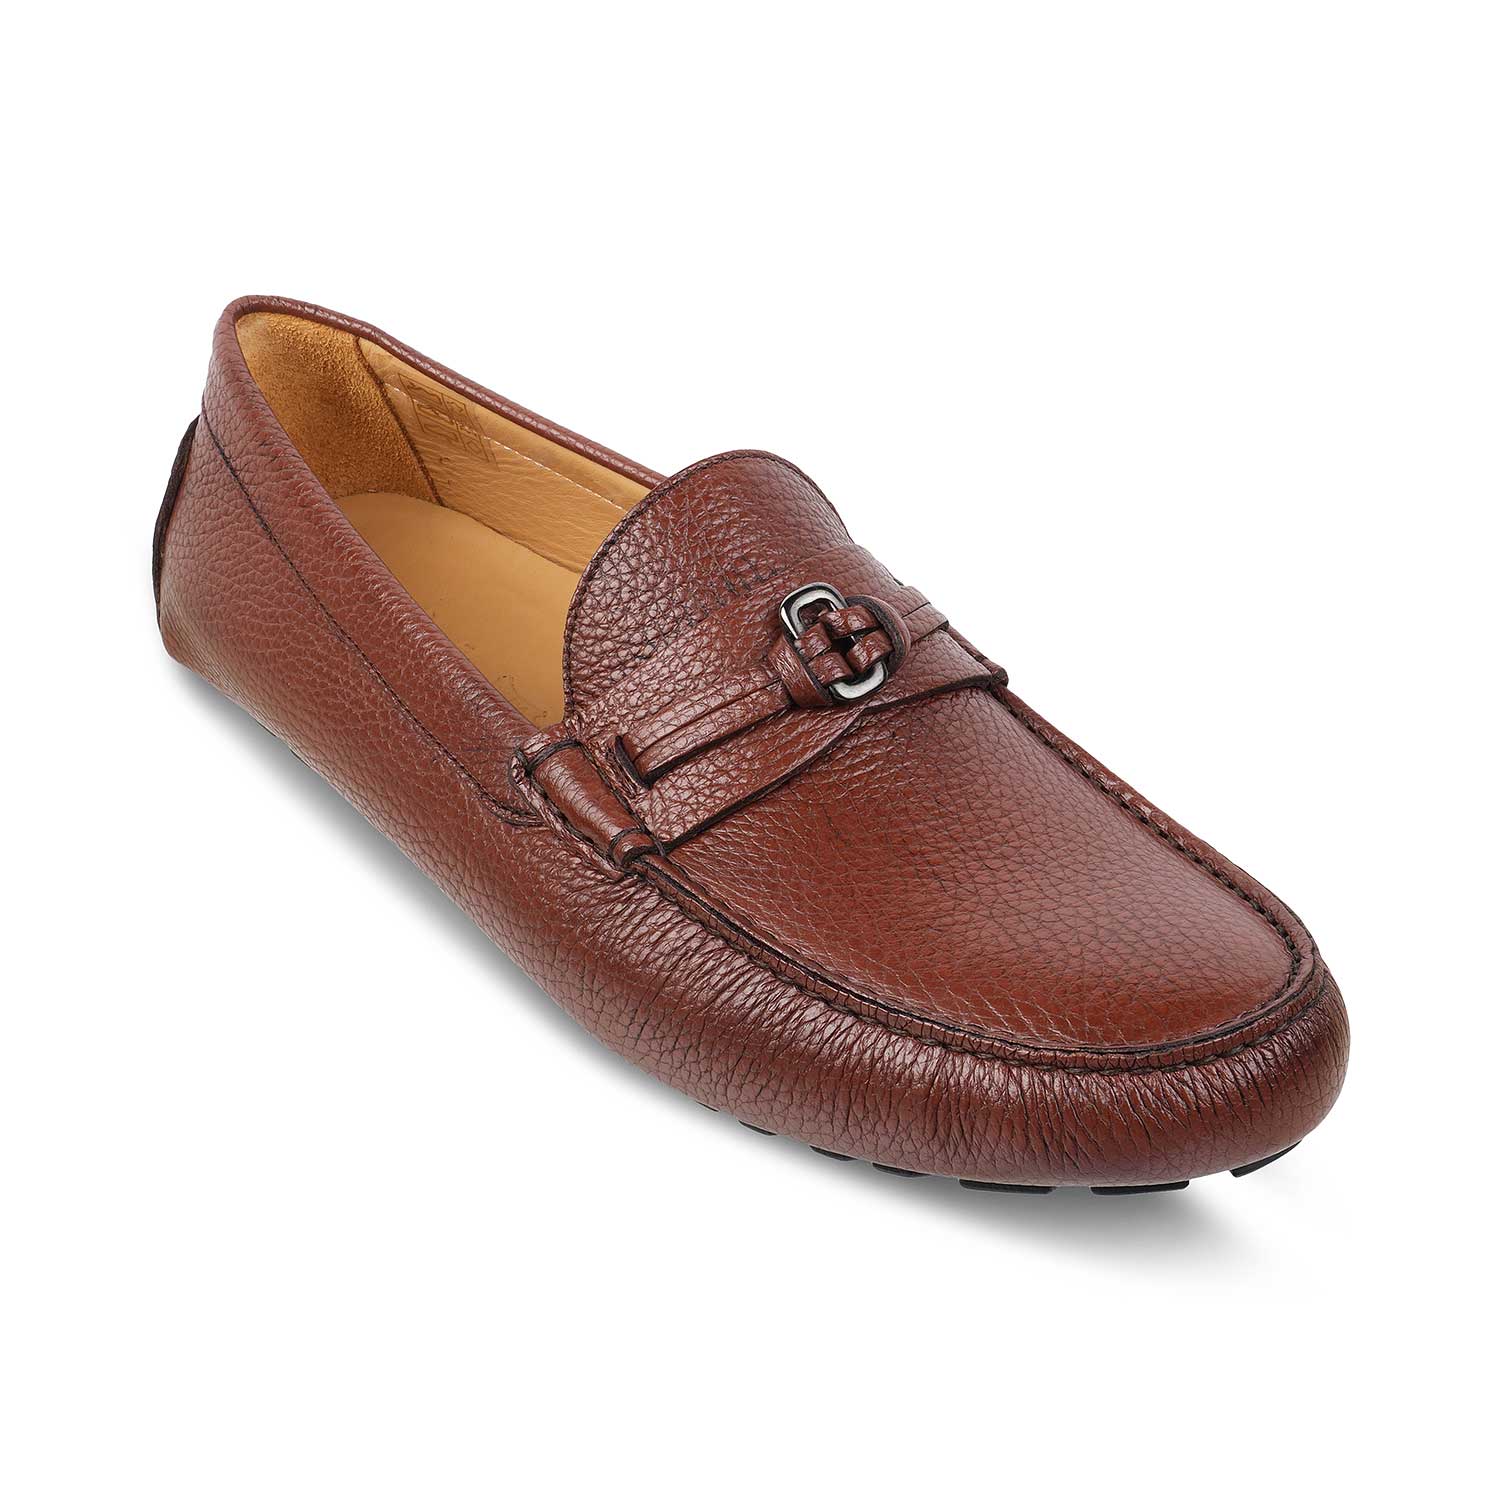 The Maiorico Brown Men's Handcrafted Leather Driving Loafers Tresmode